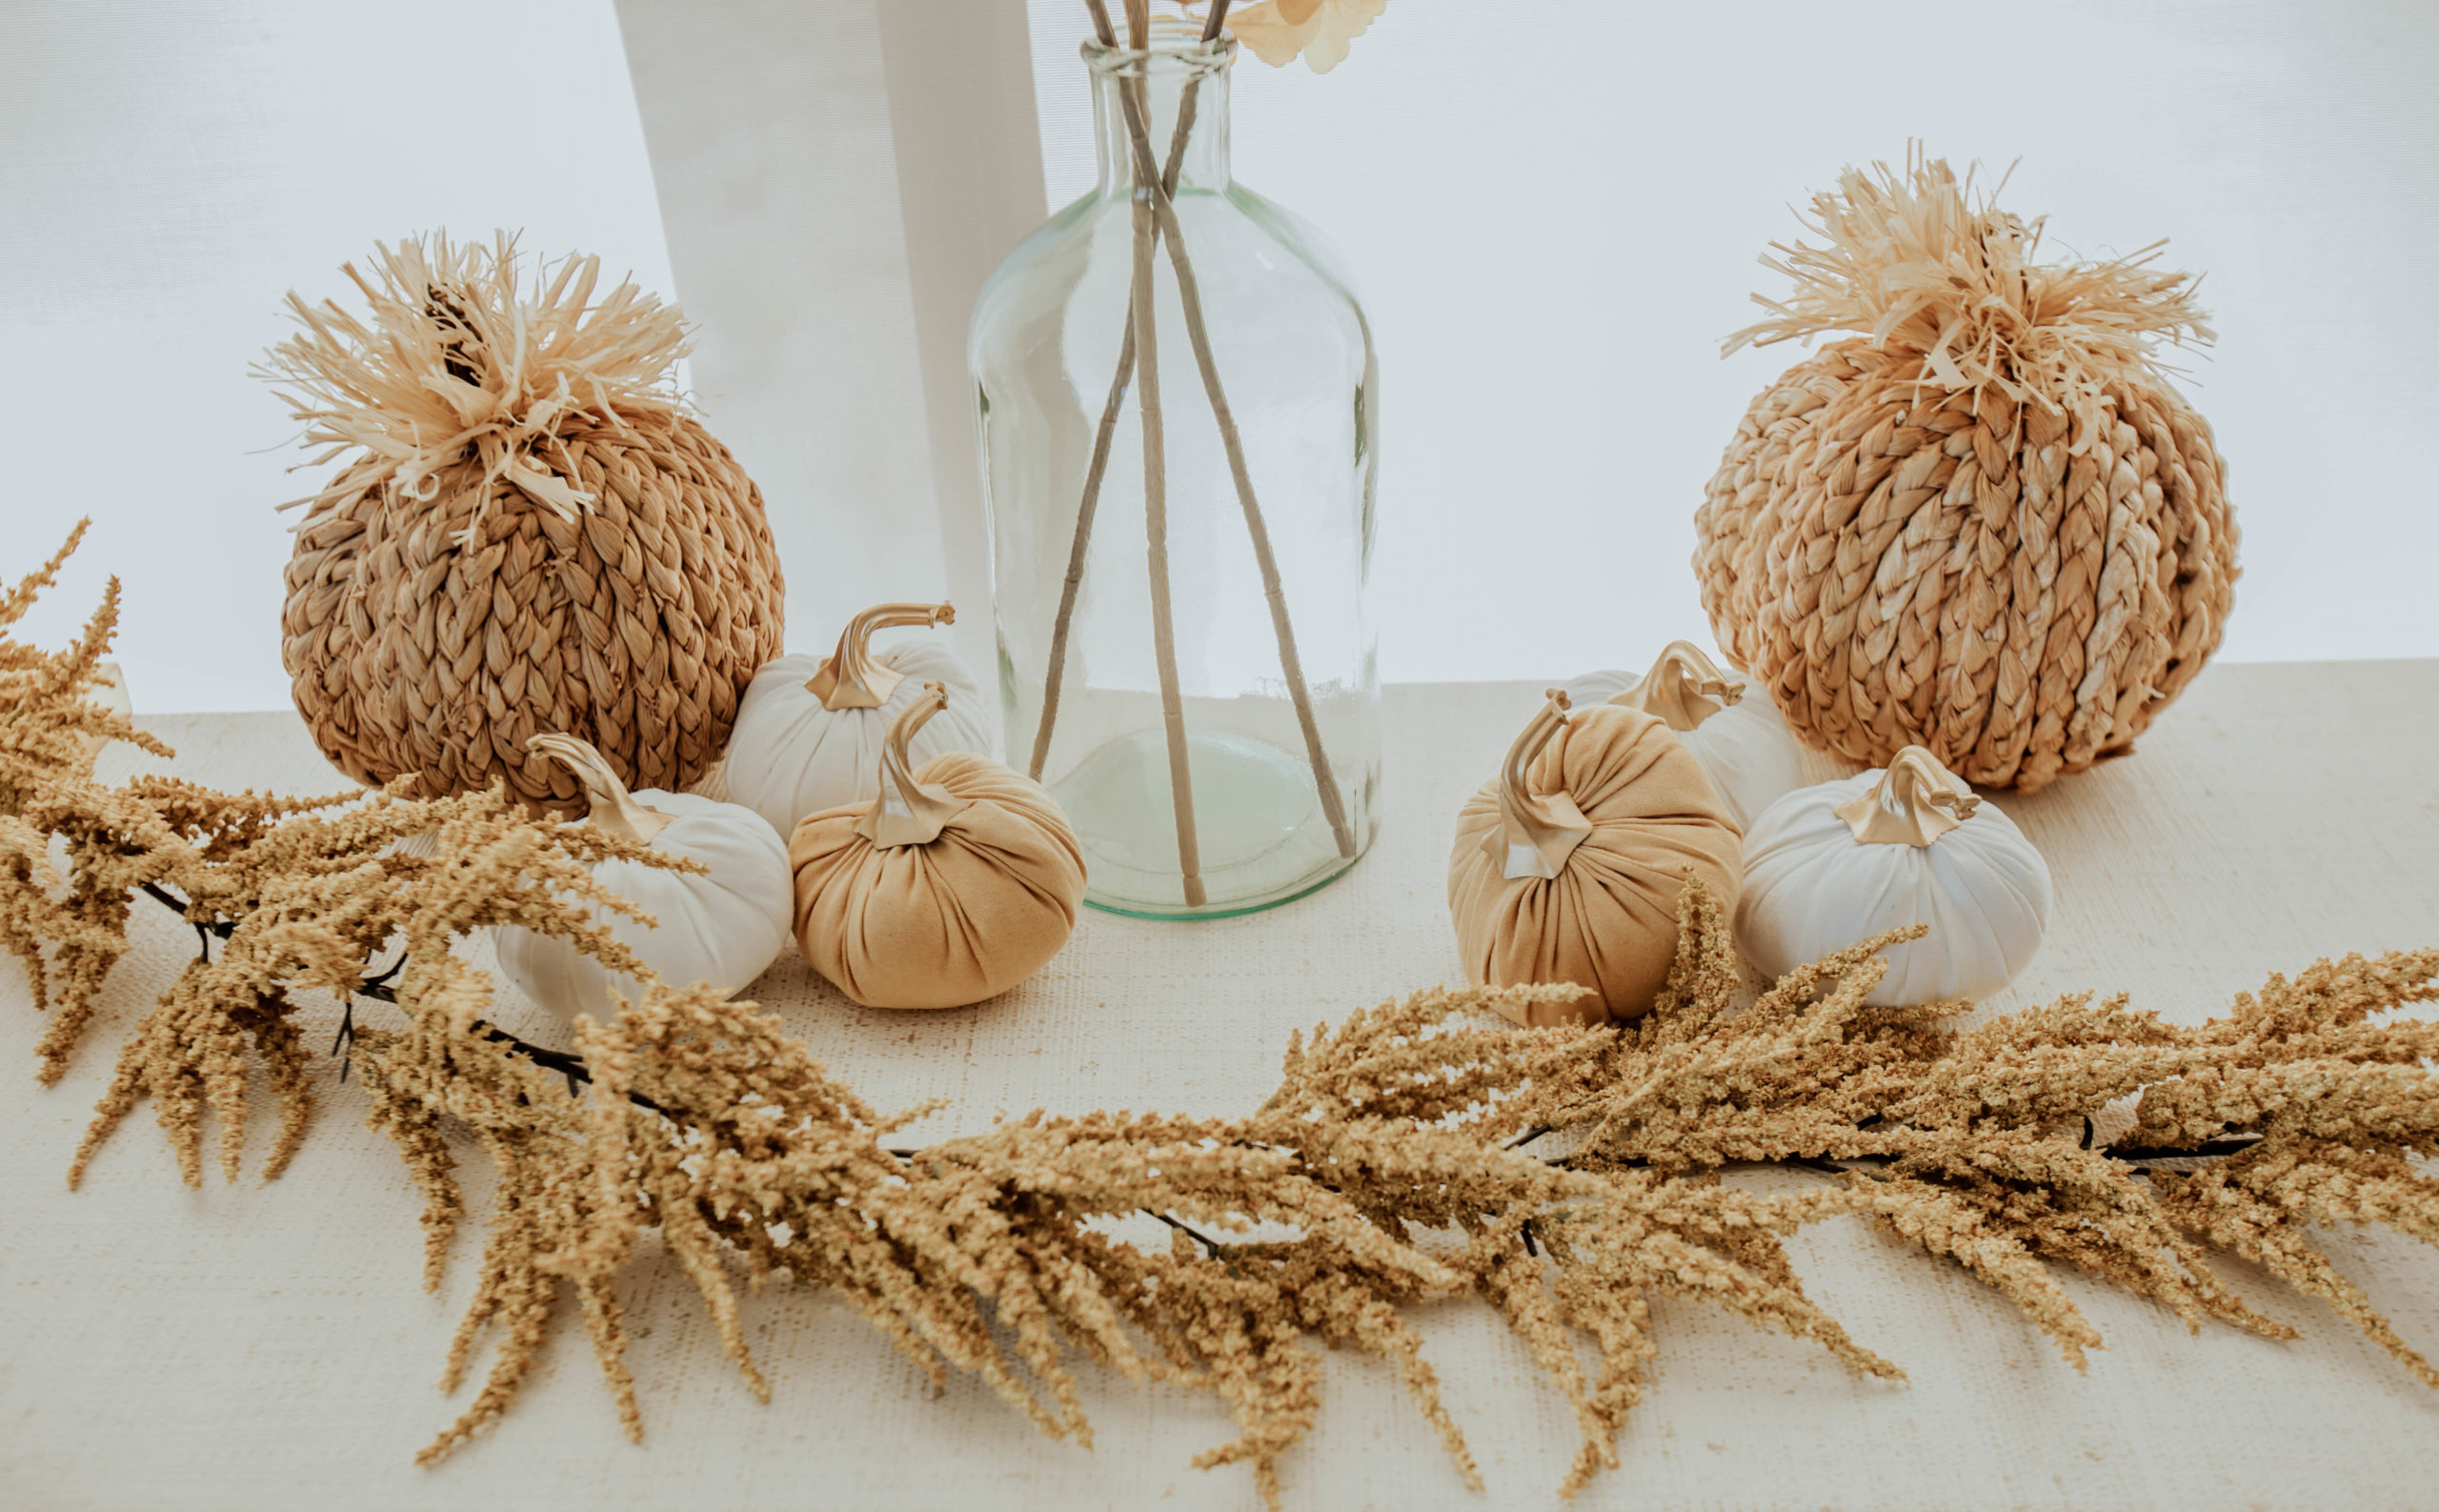 Reno bloggers Ashley Zeal Hurd and Emily Wieczorek share their favorite fall decor. They found great items at all price points!